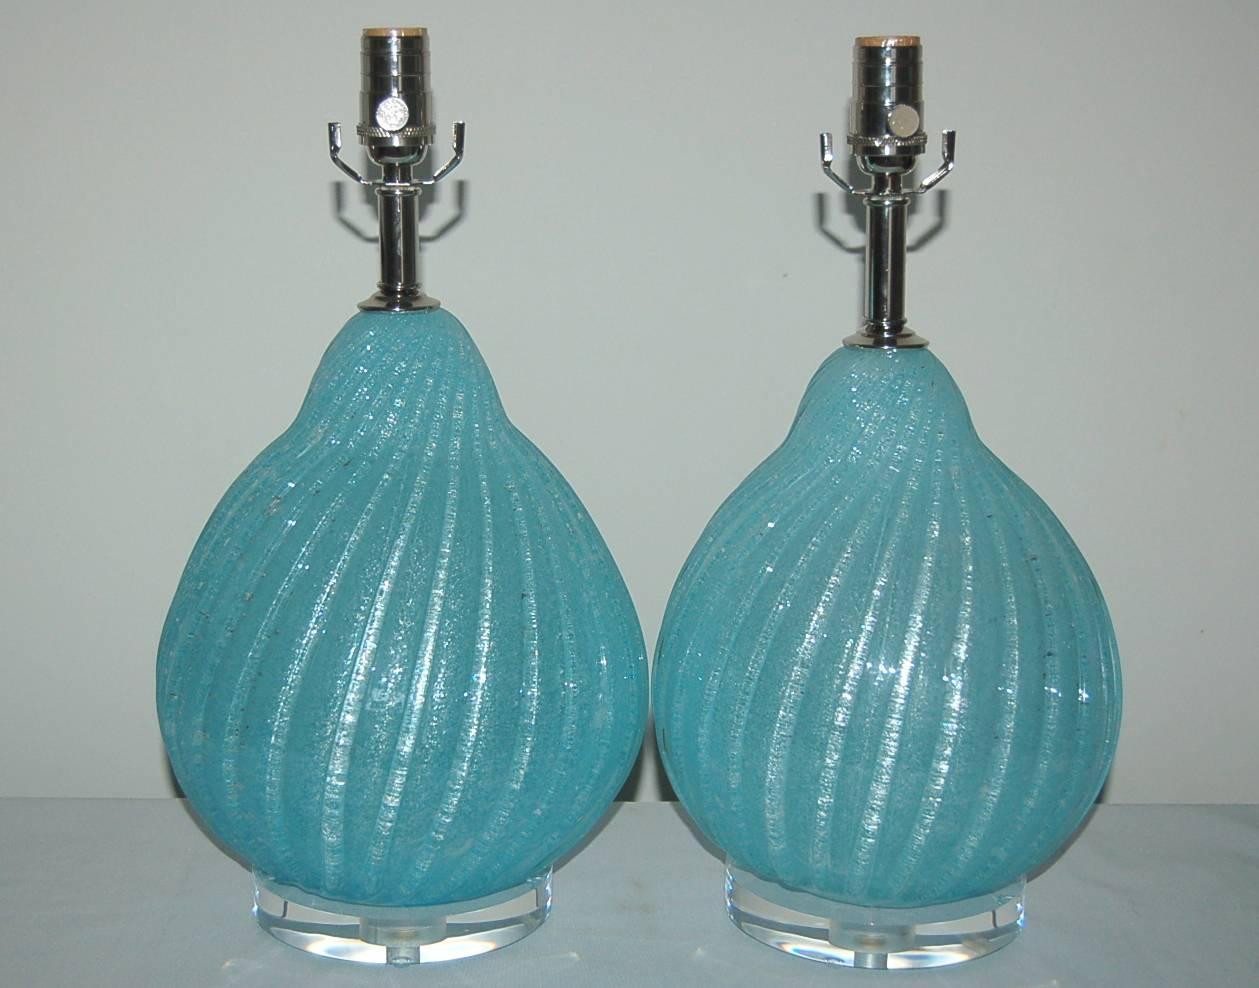 Organic shaped gourds of AQUA BLUE Pulegoso, with thousands of tiny air bubbles blown within the glass. The visual texture and color are breathtaking! Our only pair. 

They stand 18 inches from tabletop to socket top. As shown, the top of shade is